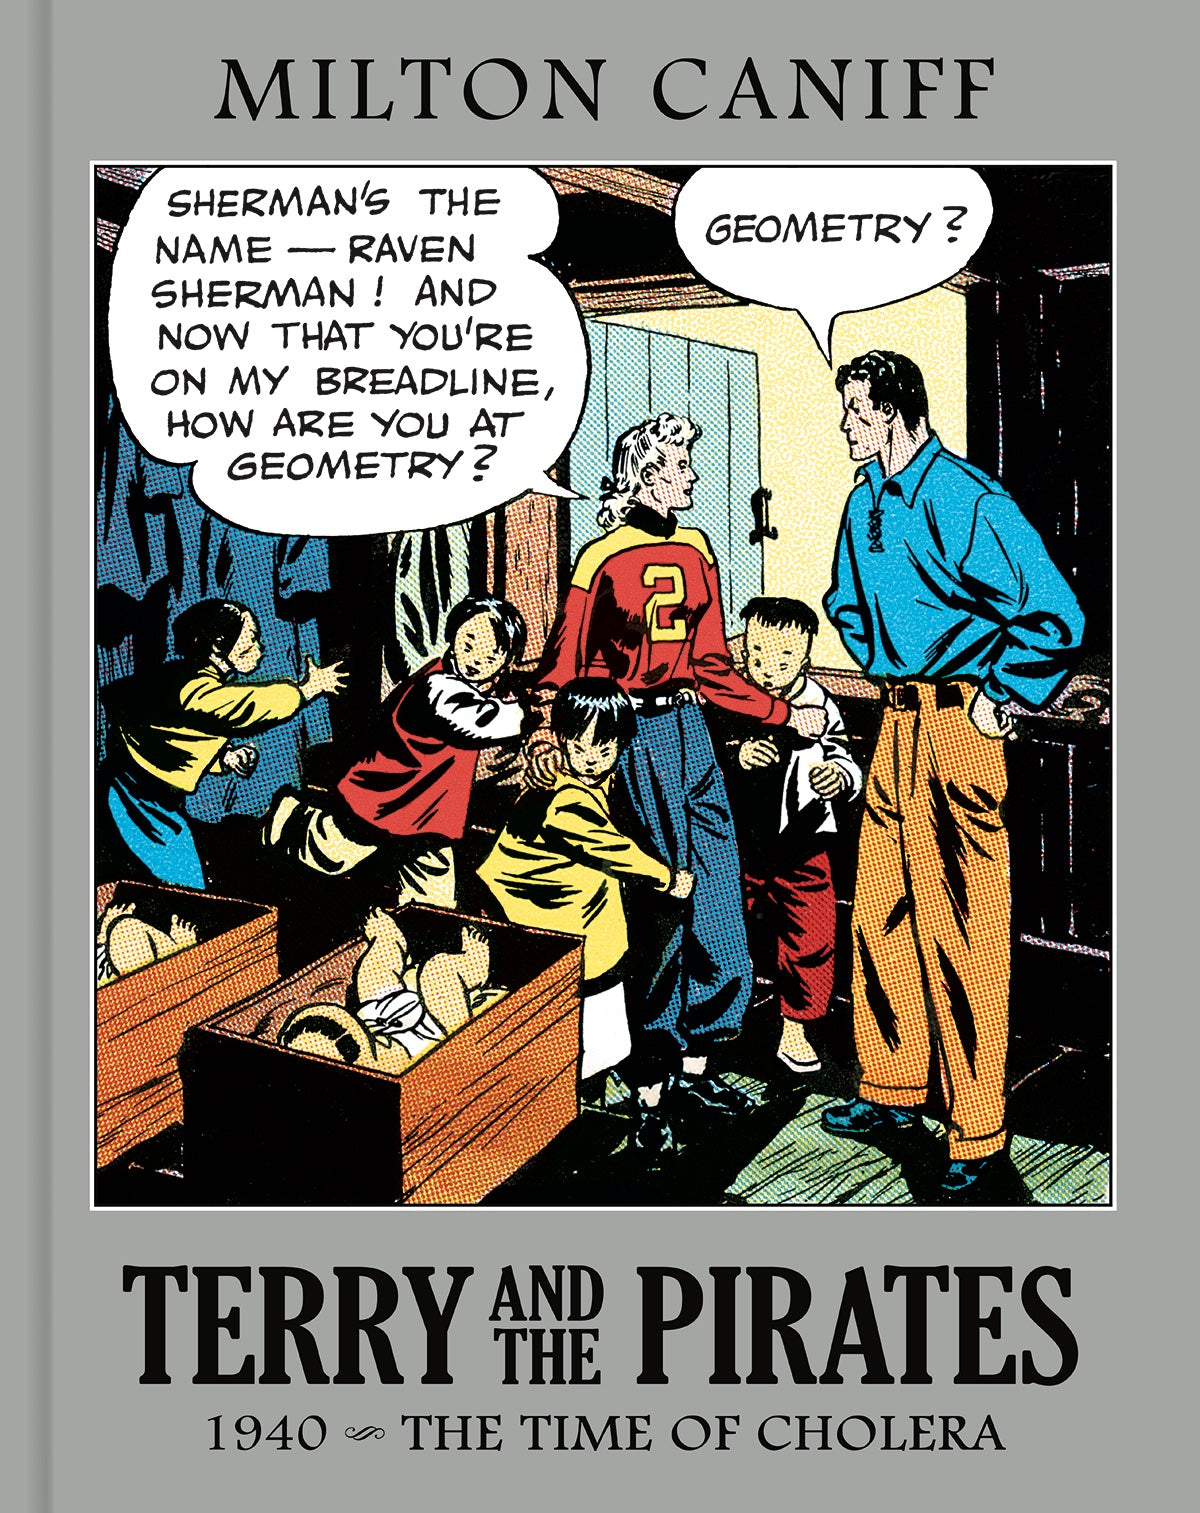 TERRY & THE PIRATES HARDCOVER THE MASTER COLLECTION 1940 THE TIME OF CHOLARA